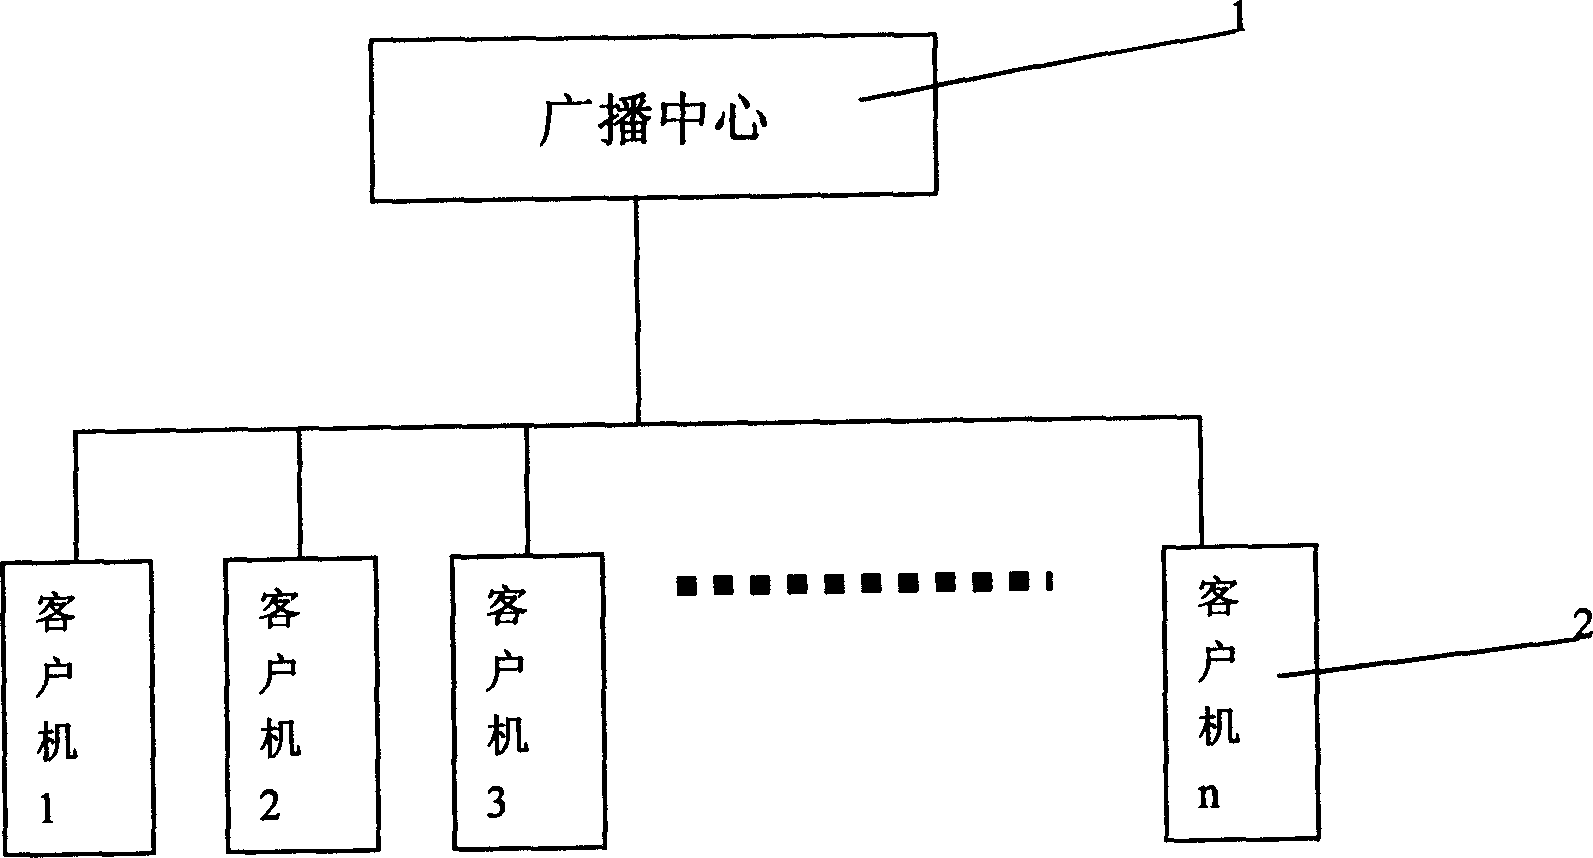 A digital television broadcasting system having reservation and storage function